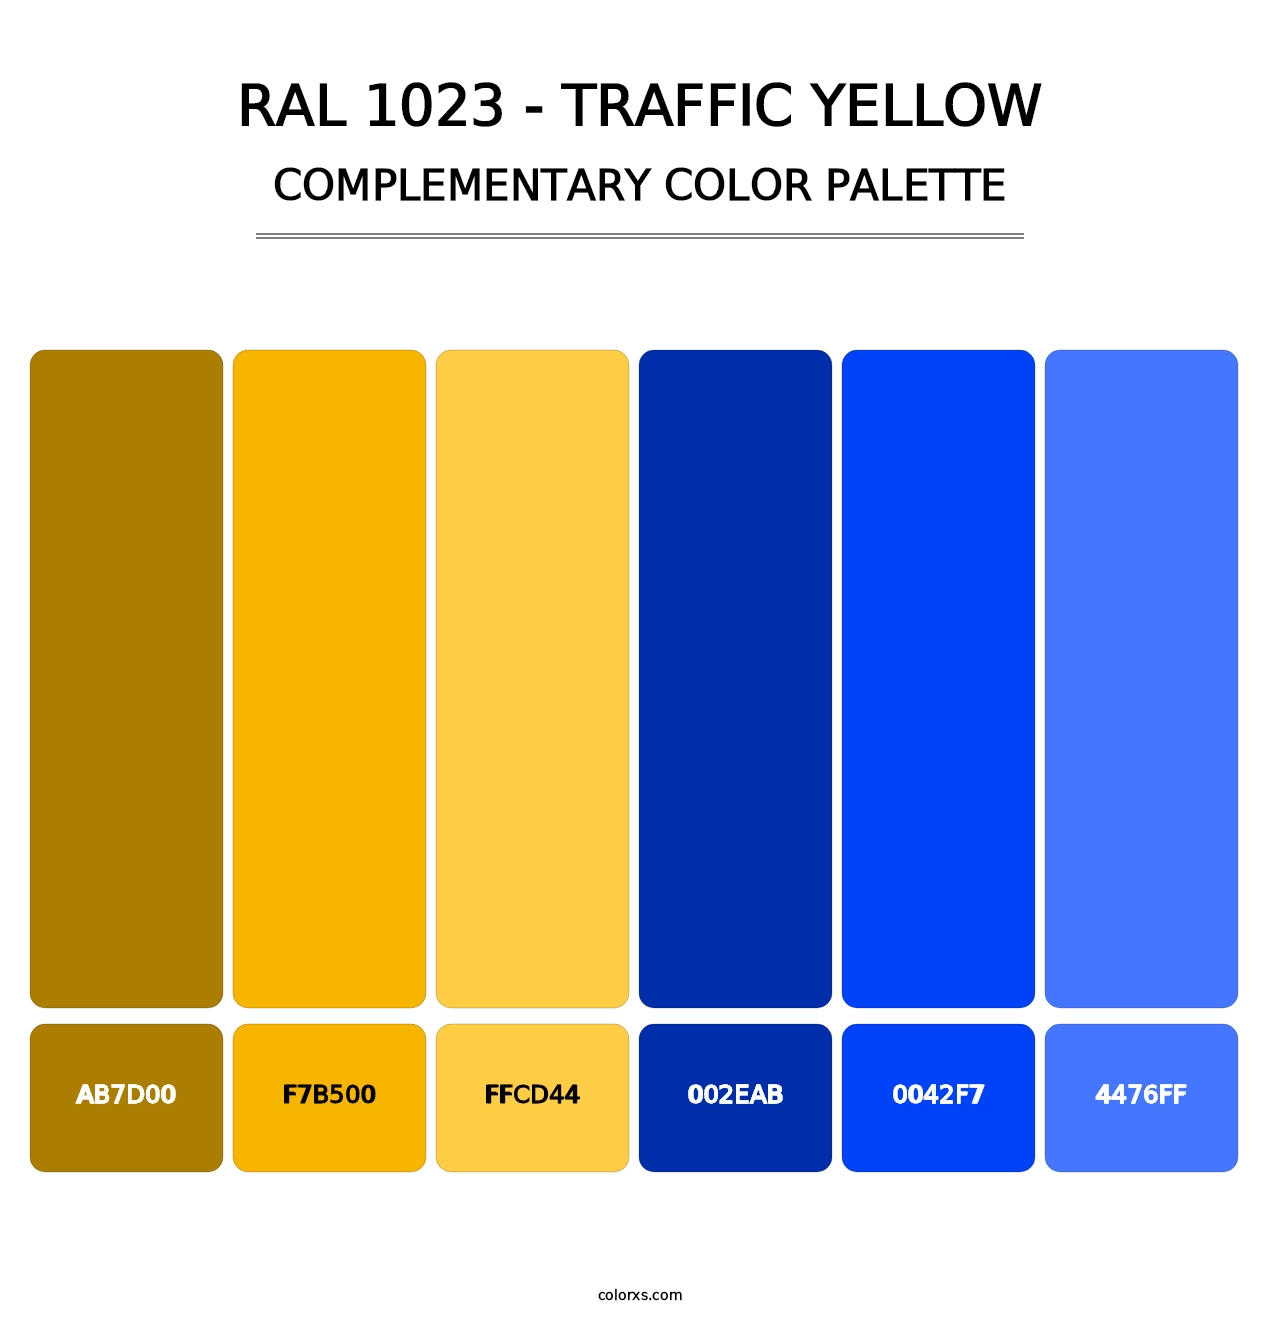 RAL 1023 - Traffic Yellow - Complementary Color Palette